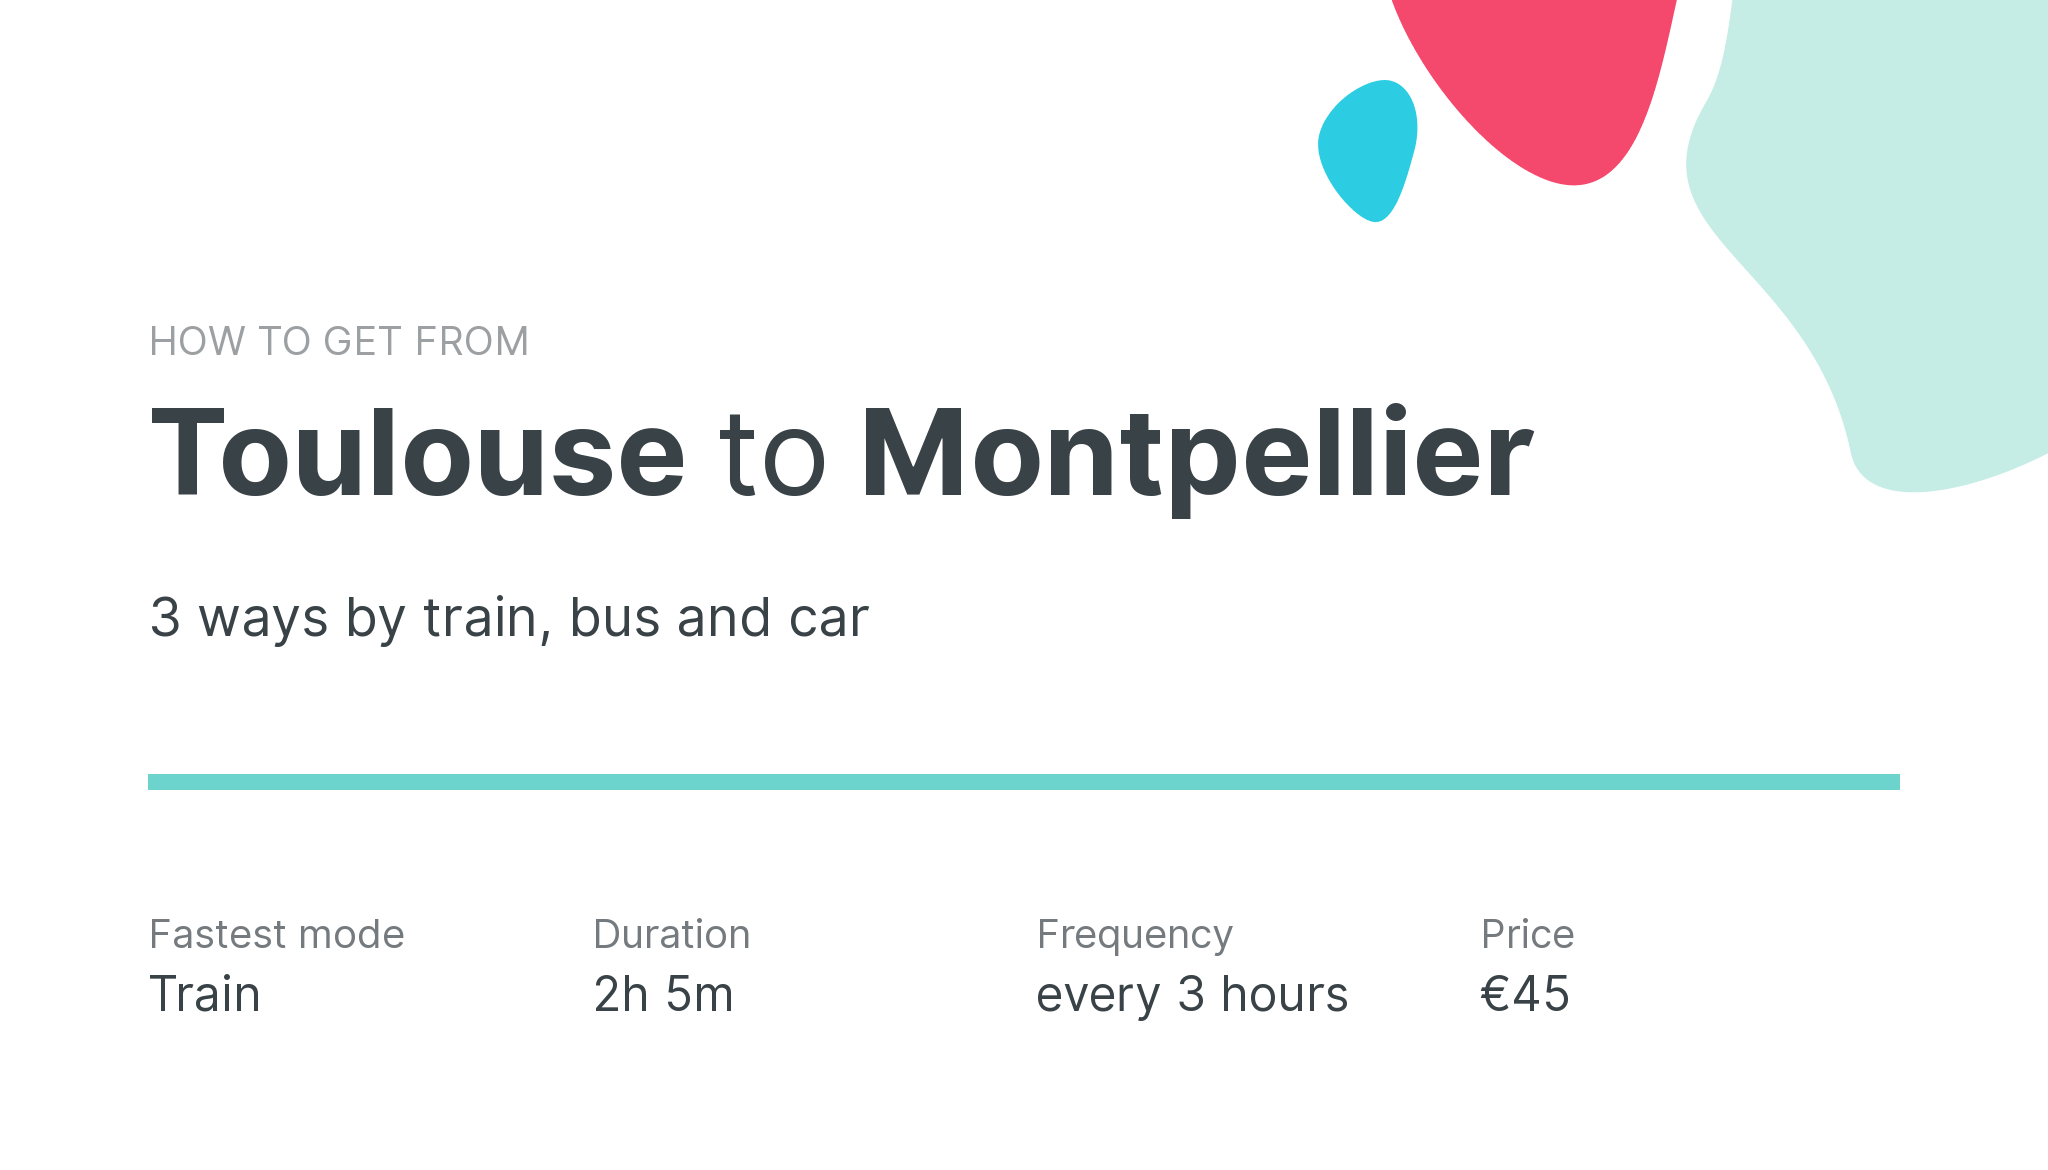 How do I get from Toulouse to Montpellier